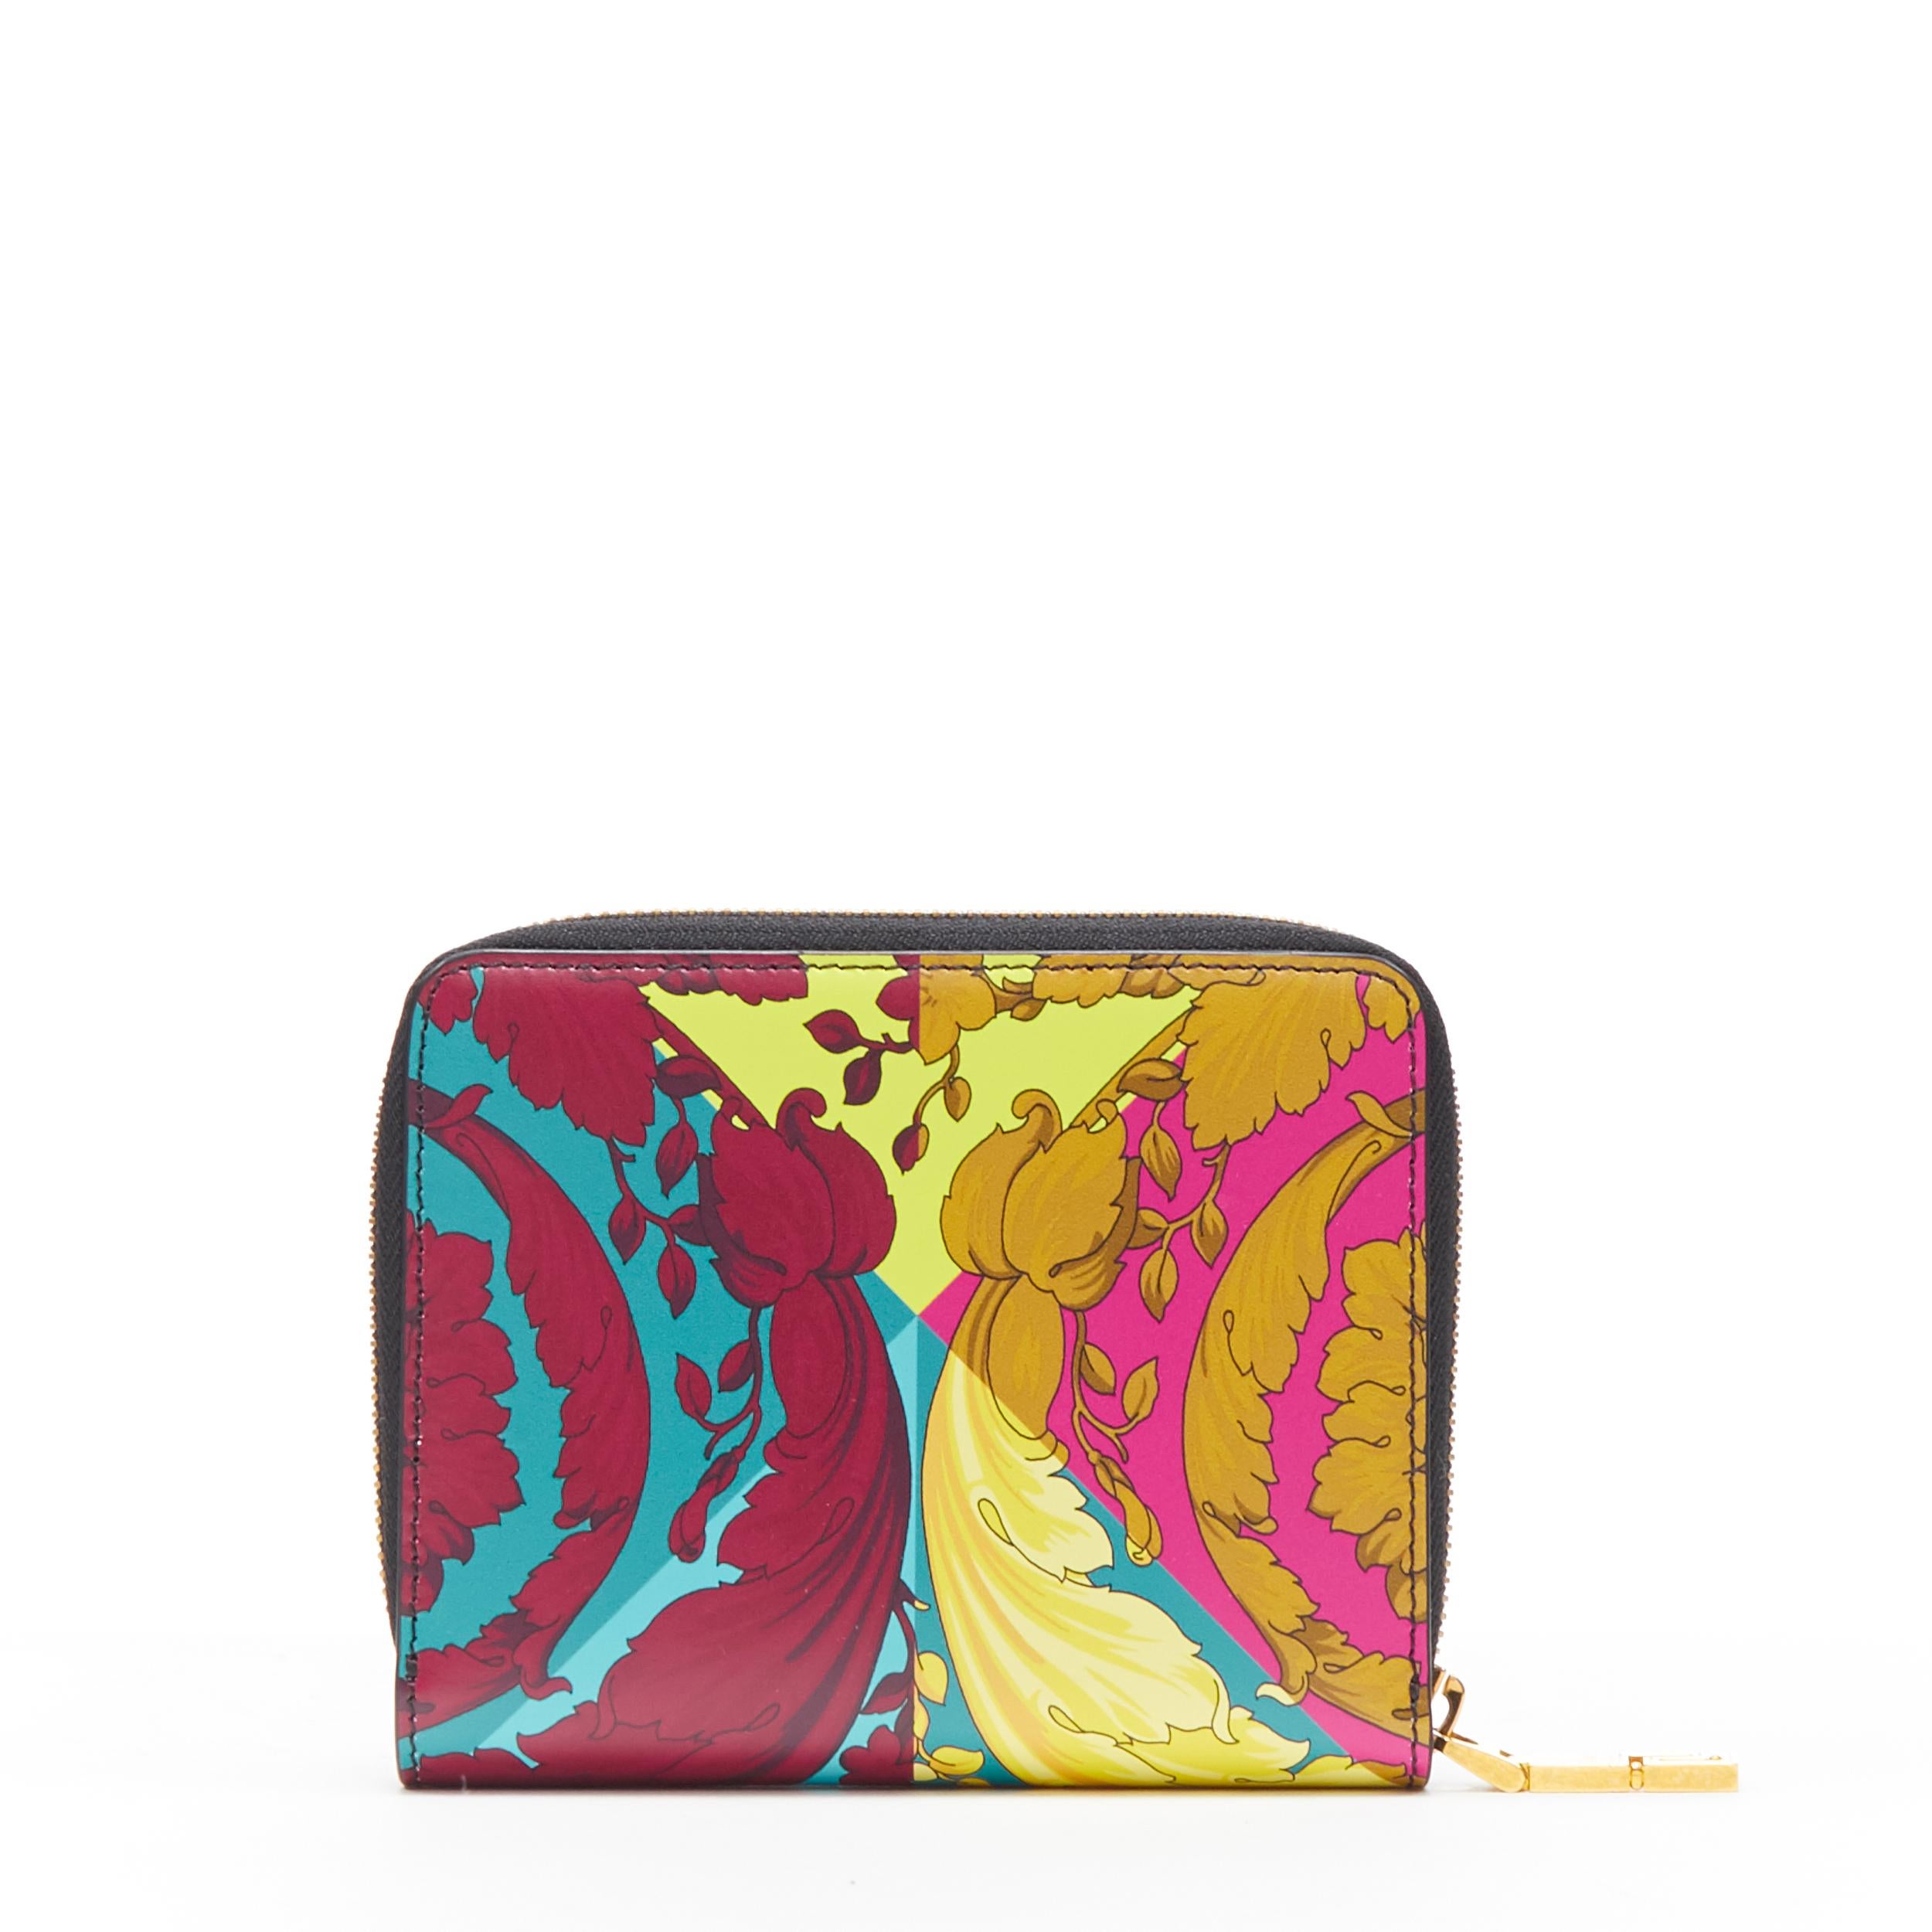 new VERSACE Techni Barocco print leather gold Medusa face zip around wallet 
Brand: Versace
Designer: Donatella Versace
Collection: 2019
Model Name / Style: Zip around wallet
Material: Leather
Color: Multicolour
Pattern: Floral
Closure: Zip
Extra